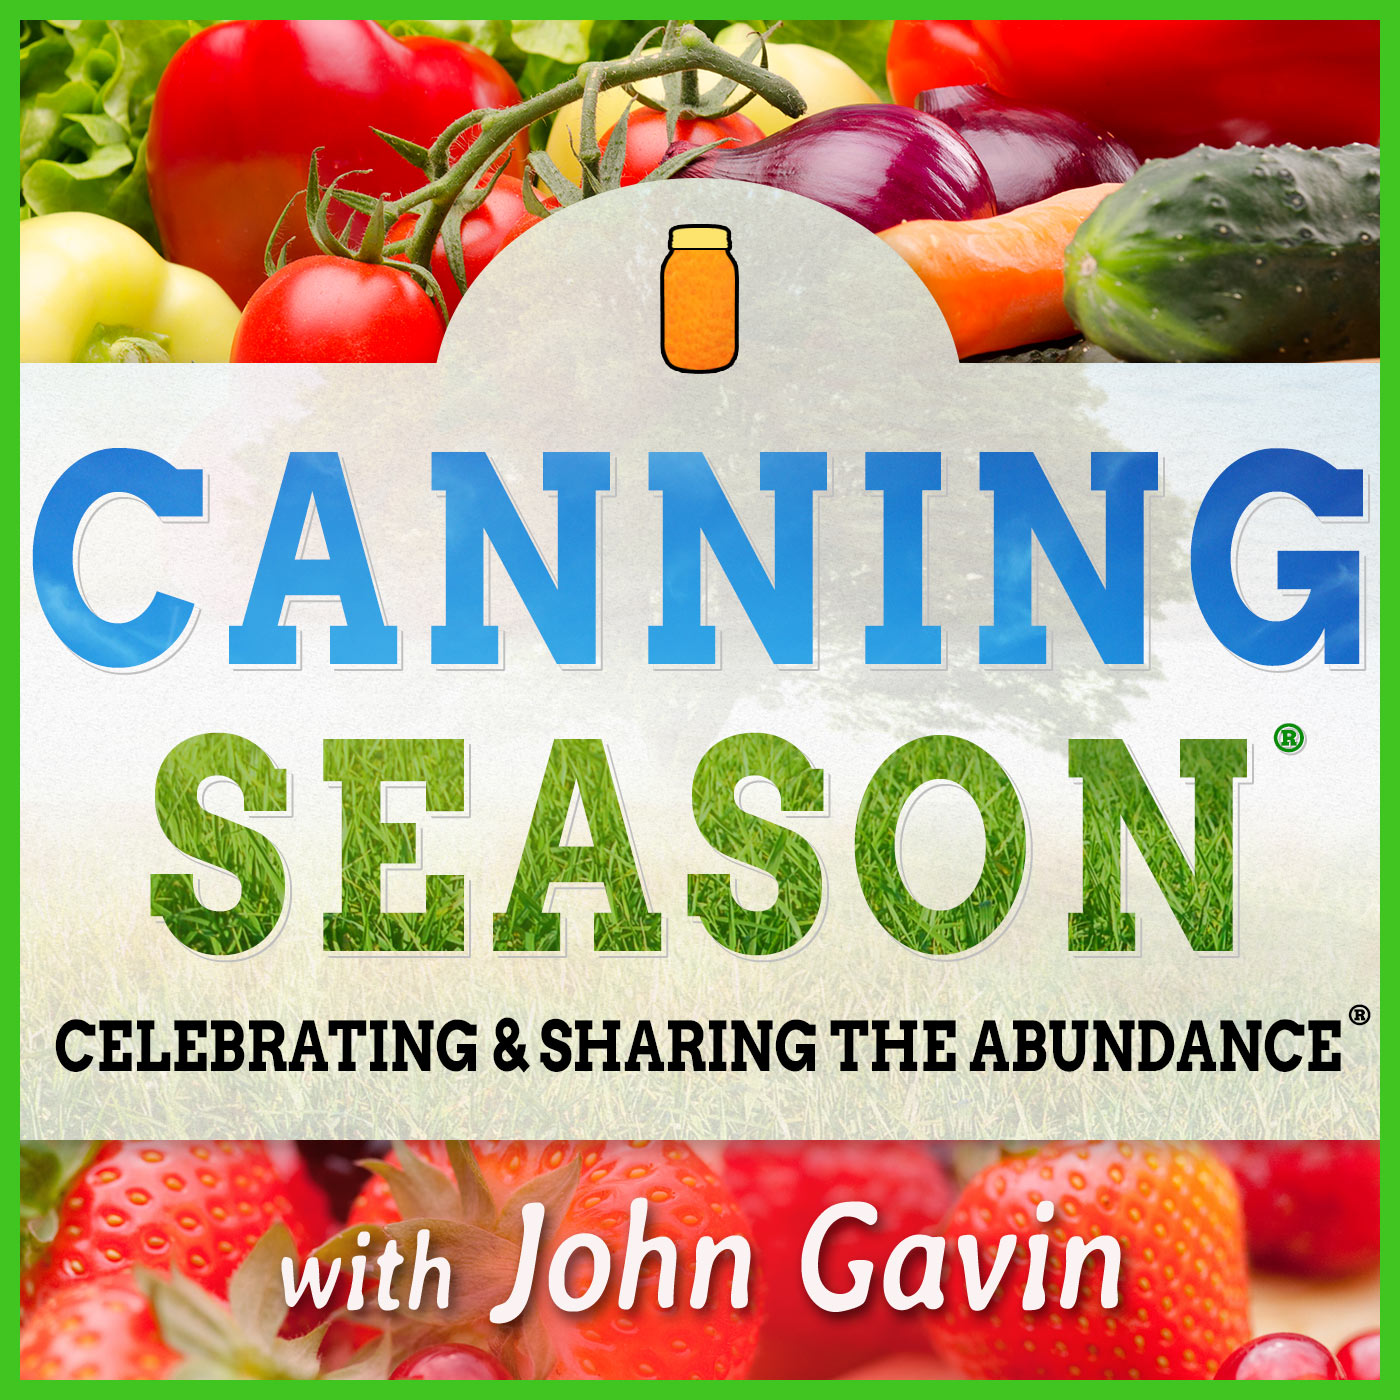 CS-033: Easily Avoid Food Poisoning & Botulism in Your Home Canning | Safety Refresher